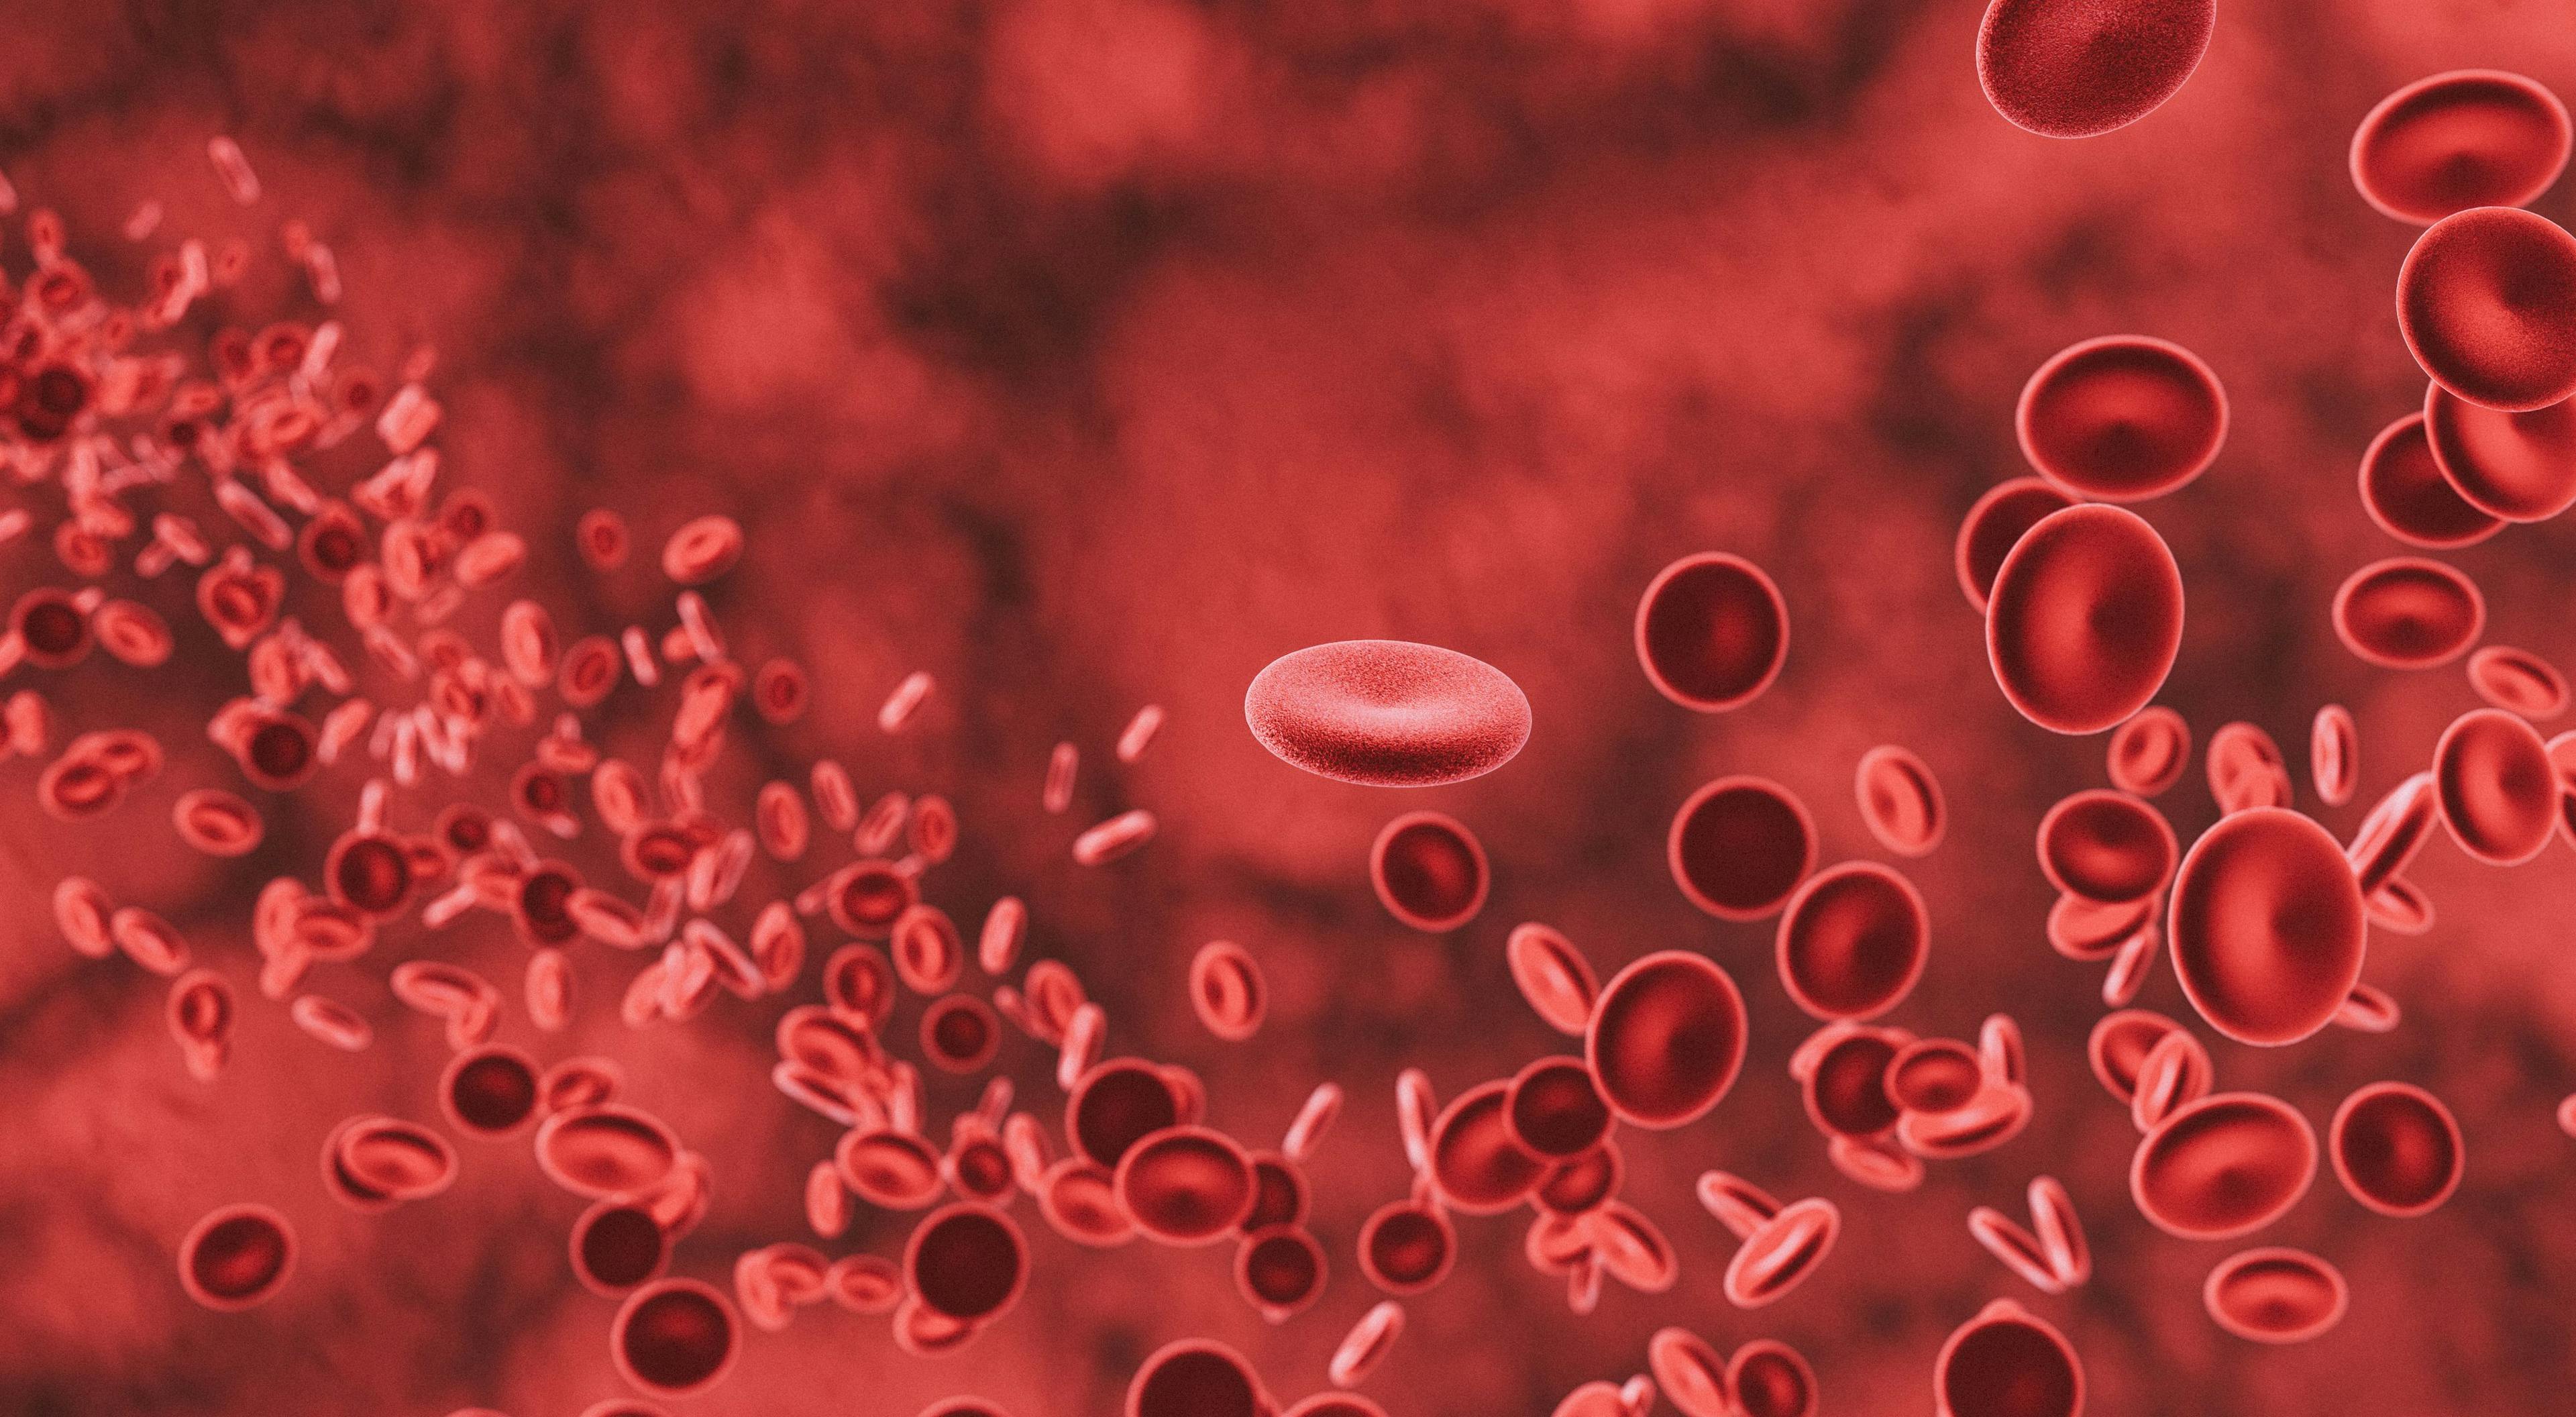 Image of red blood cells.